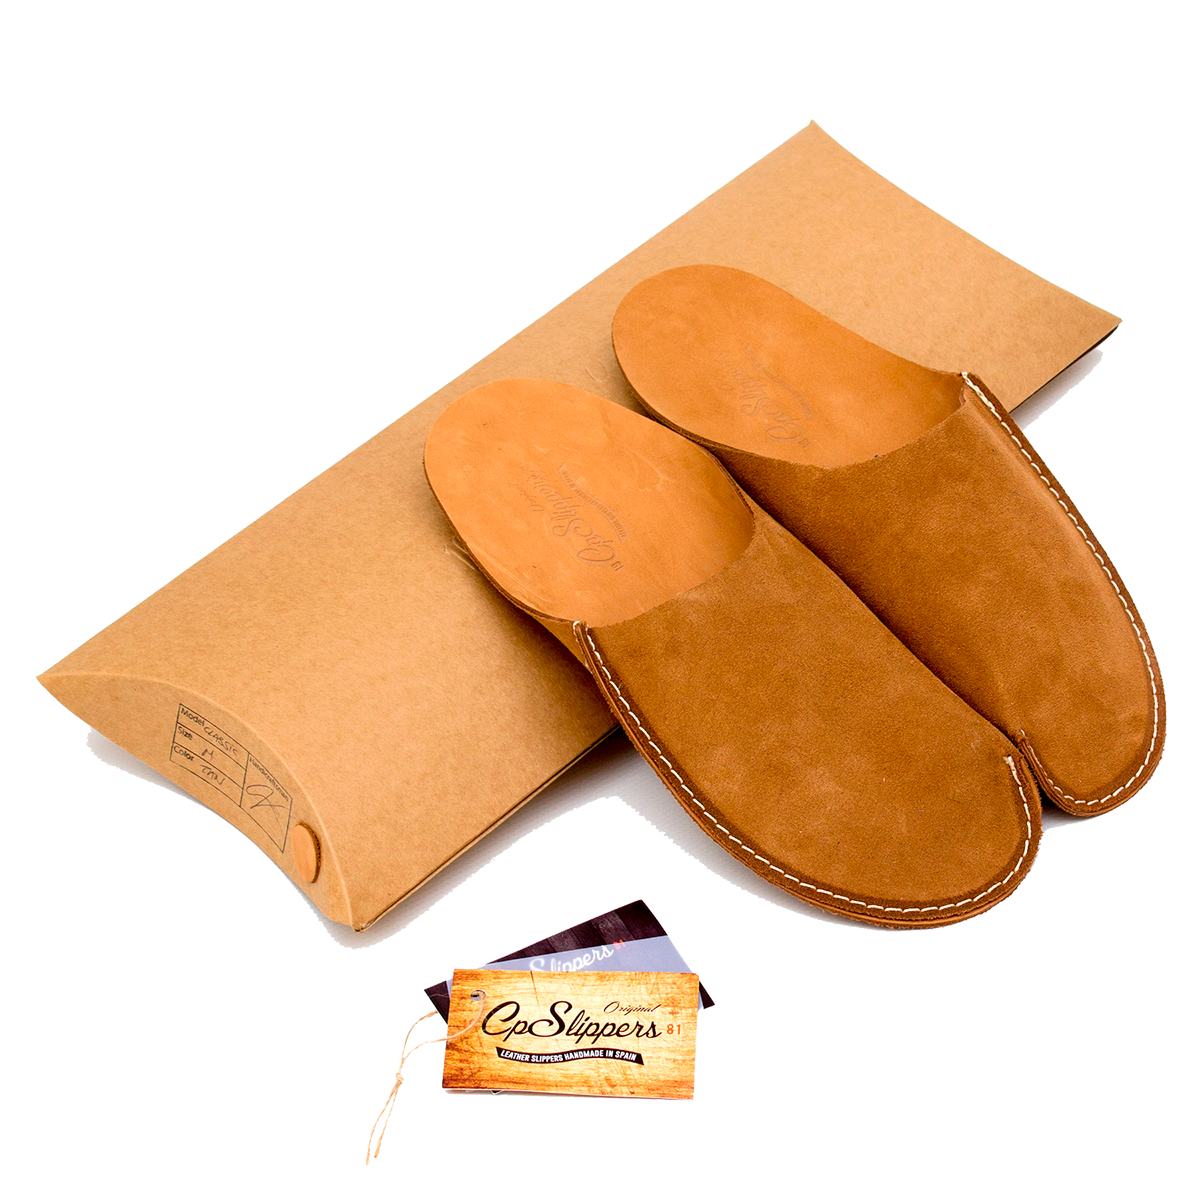 CP Slippers packaging